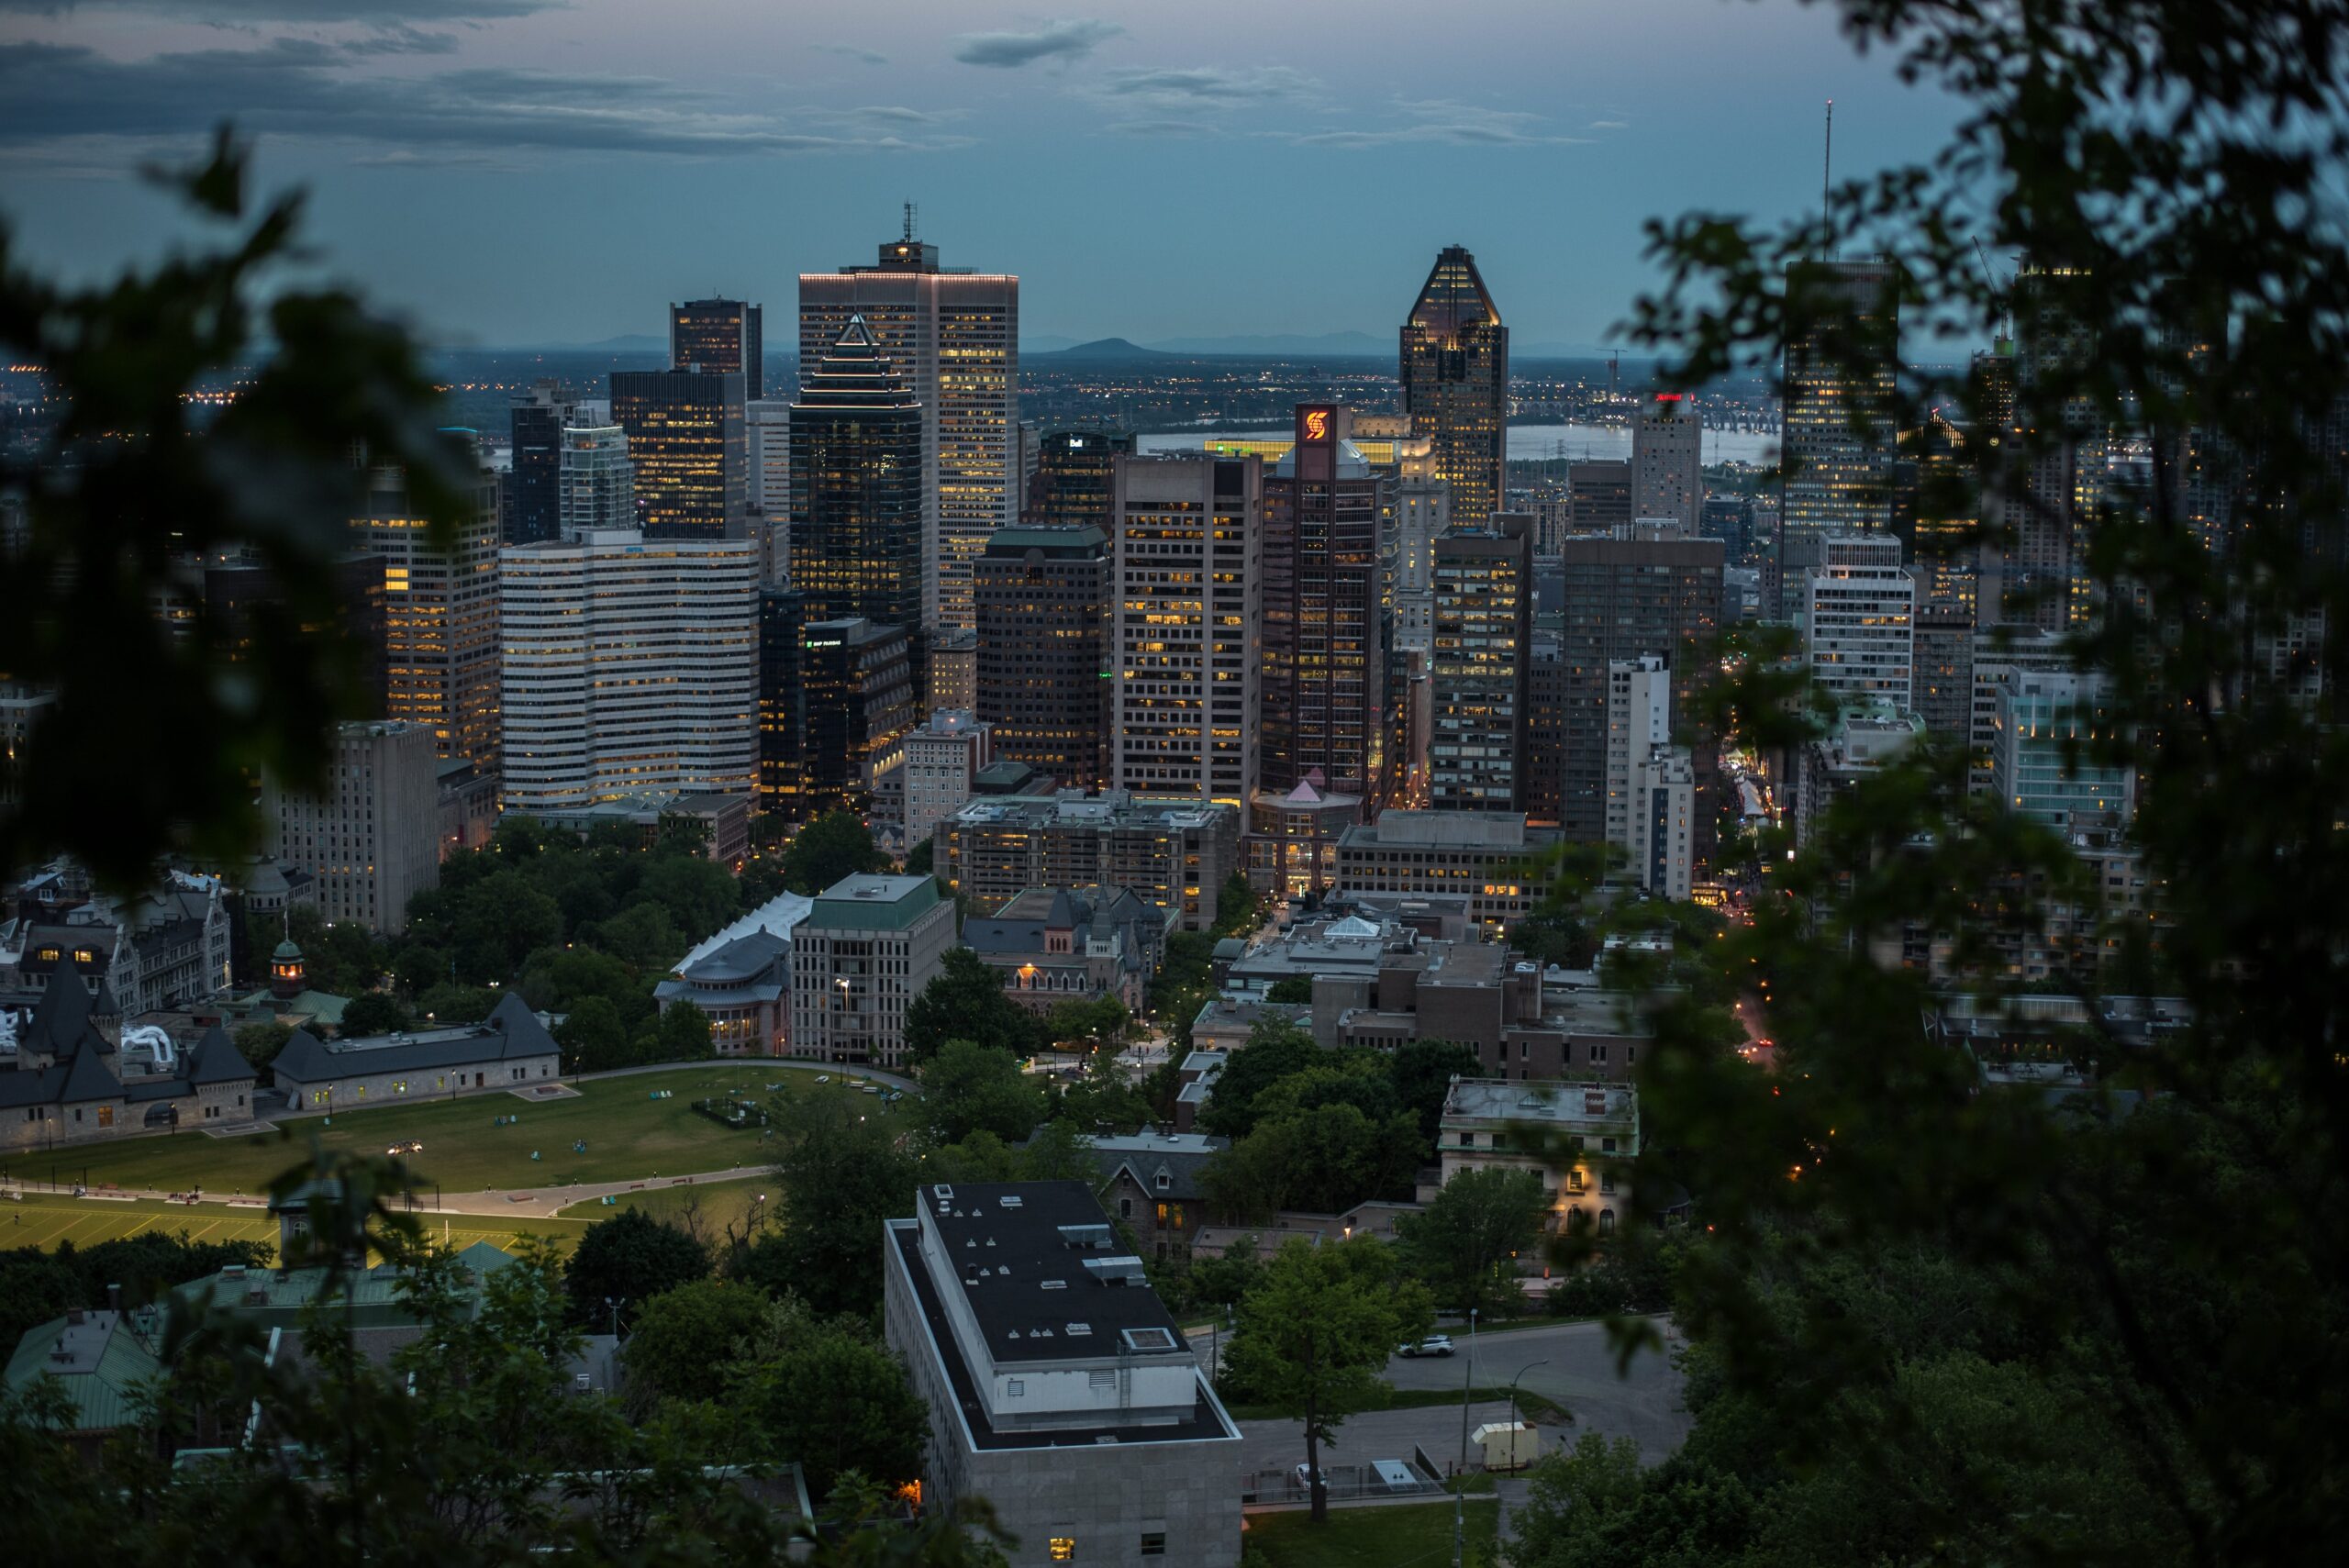 Standing on Mount Royal, overlooking the streets and skyscrapers of downtown of Montreal